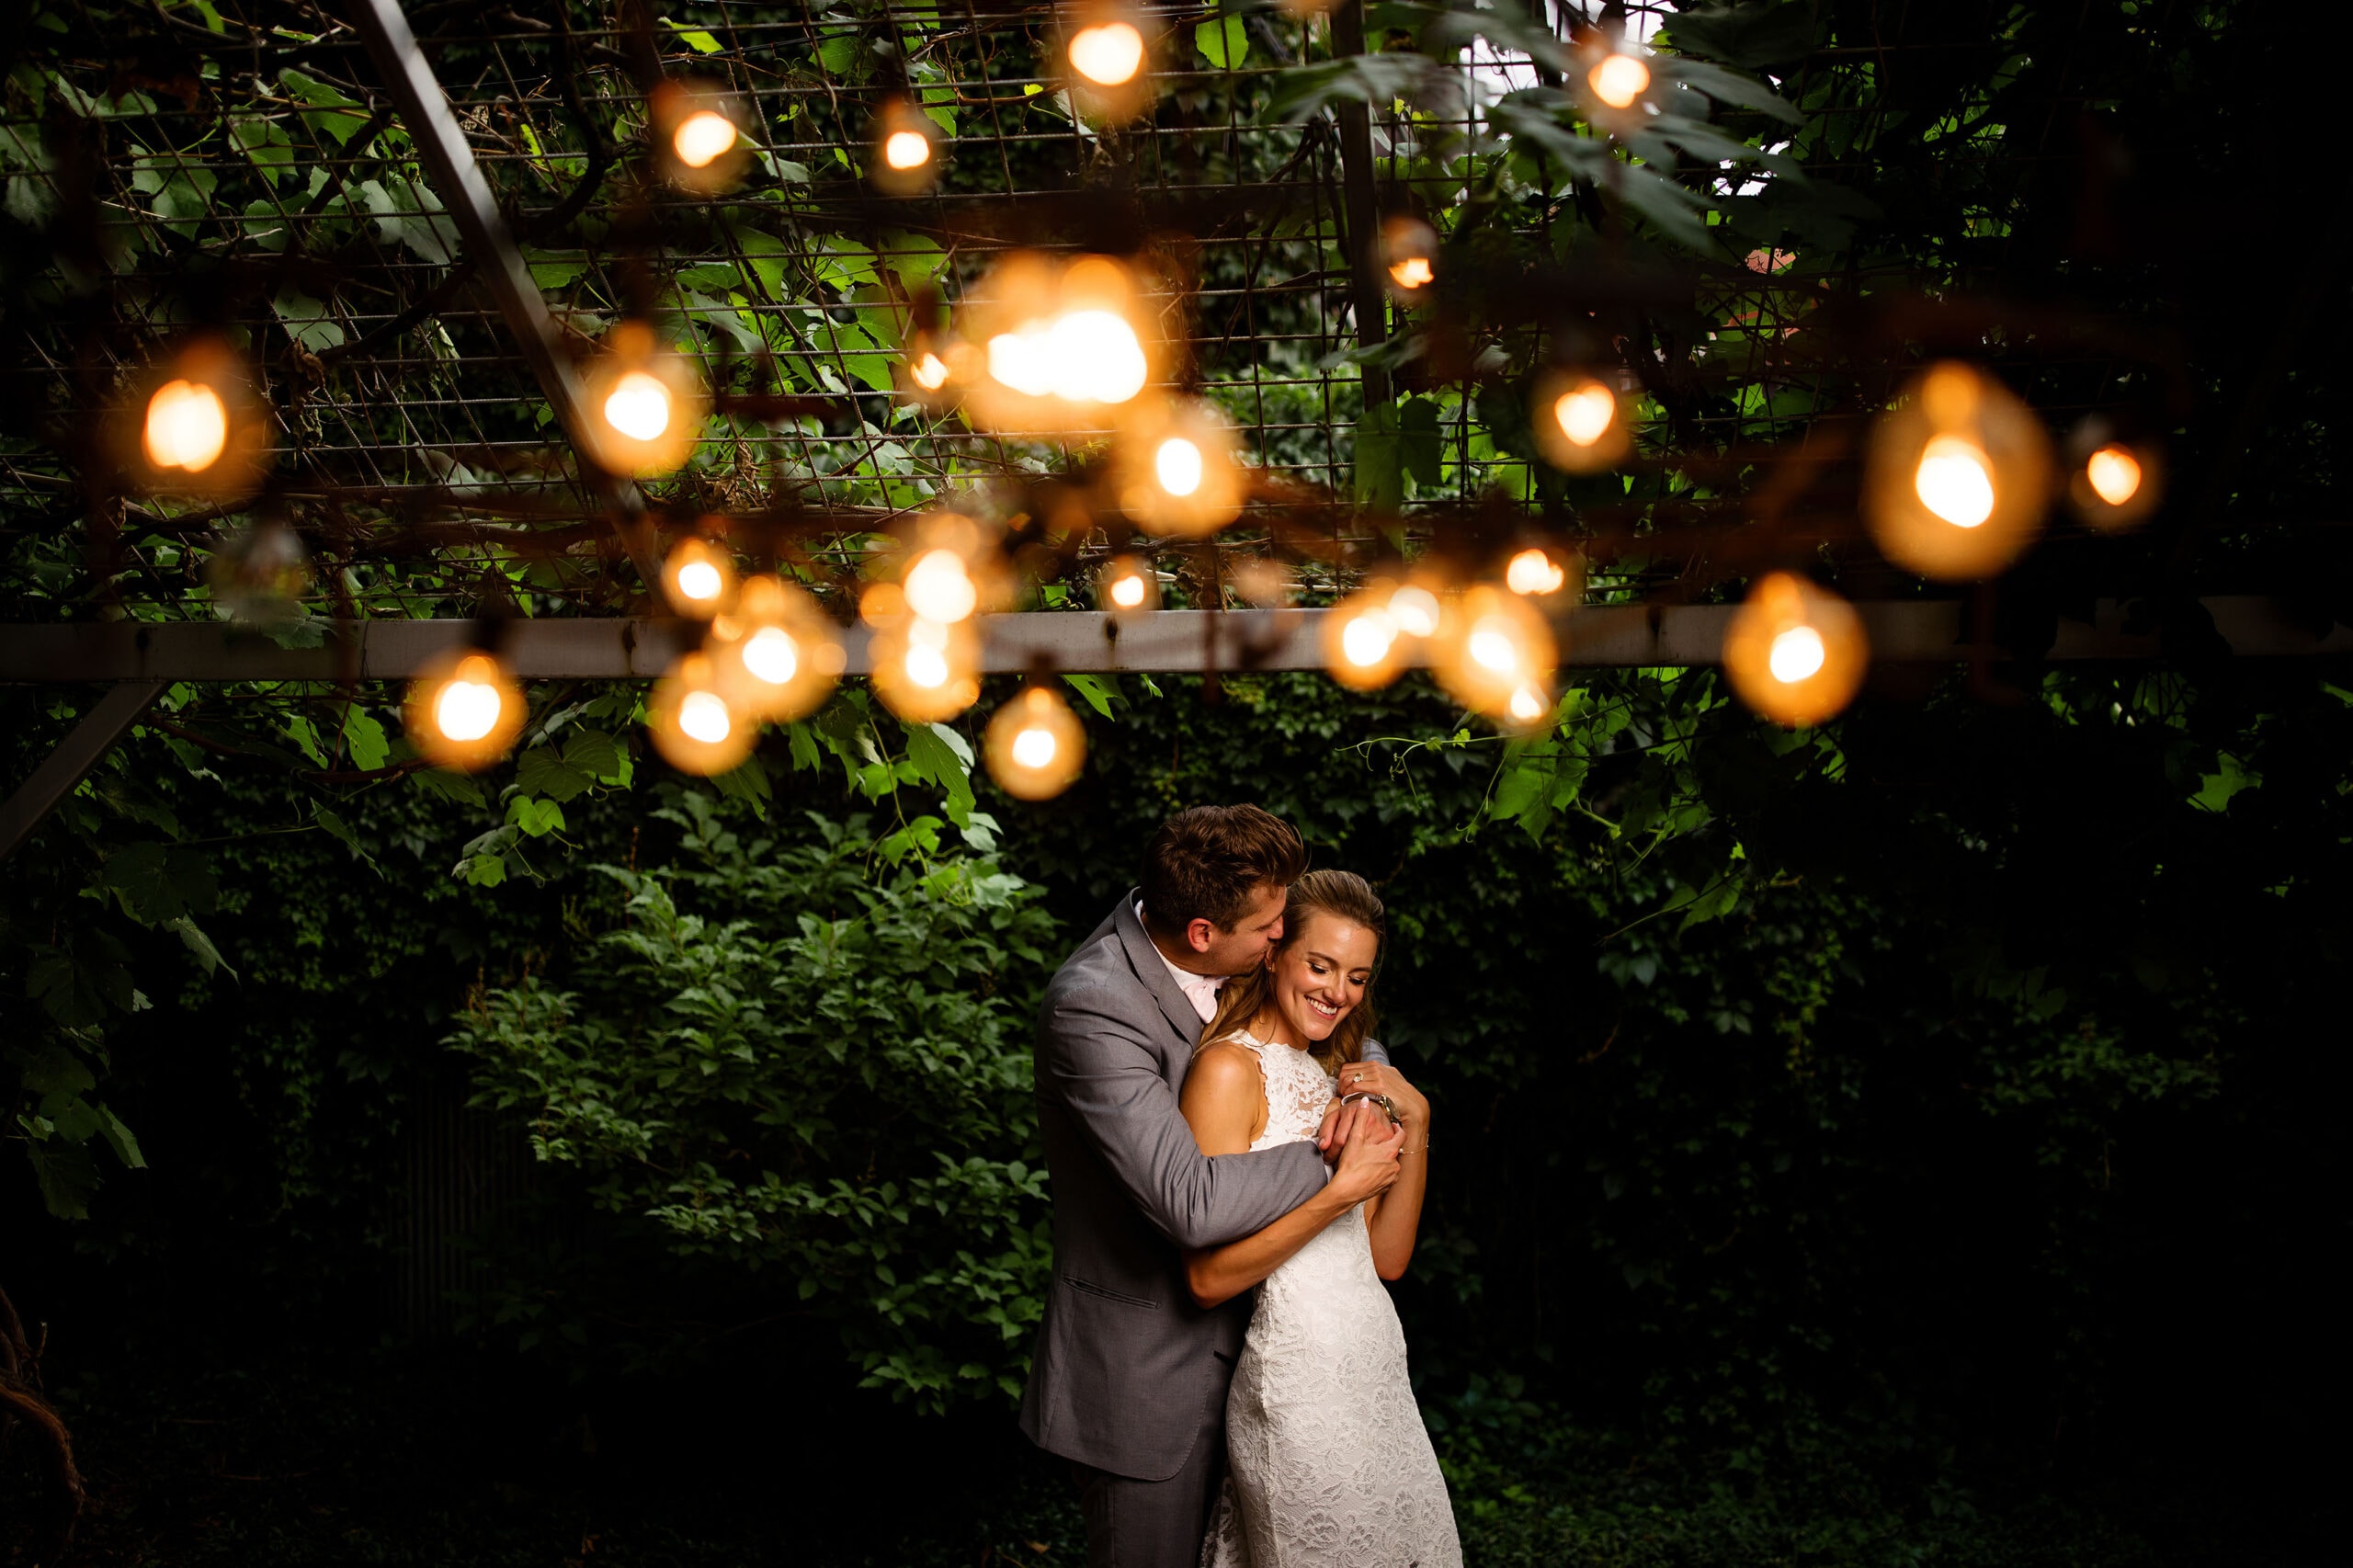 The bride and groom embrace under the market lights at Blanc on their wedding day